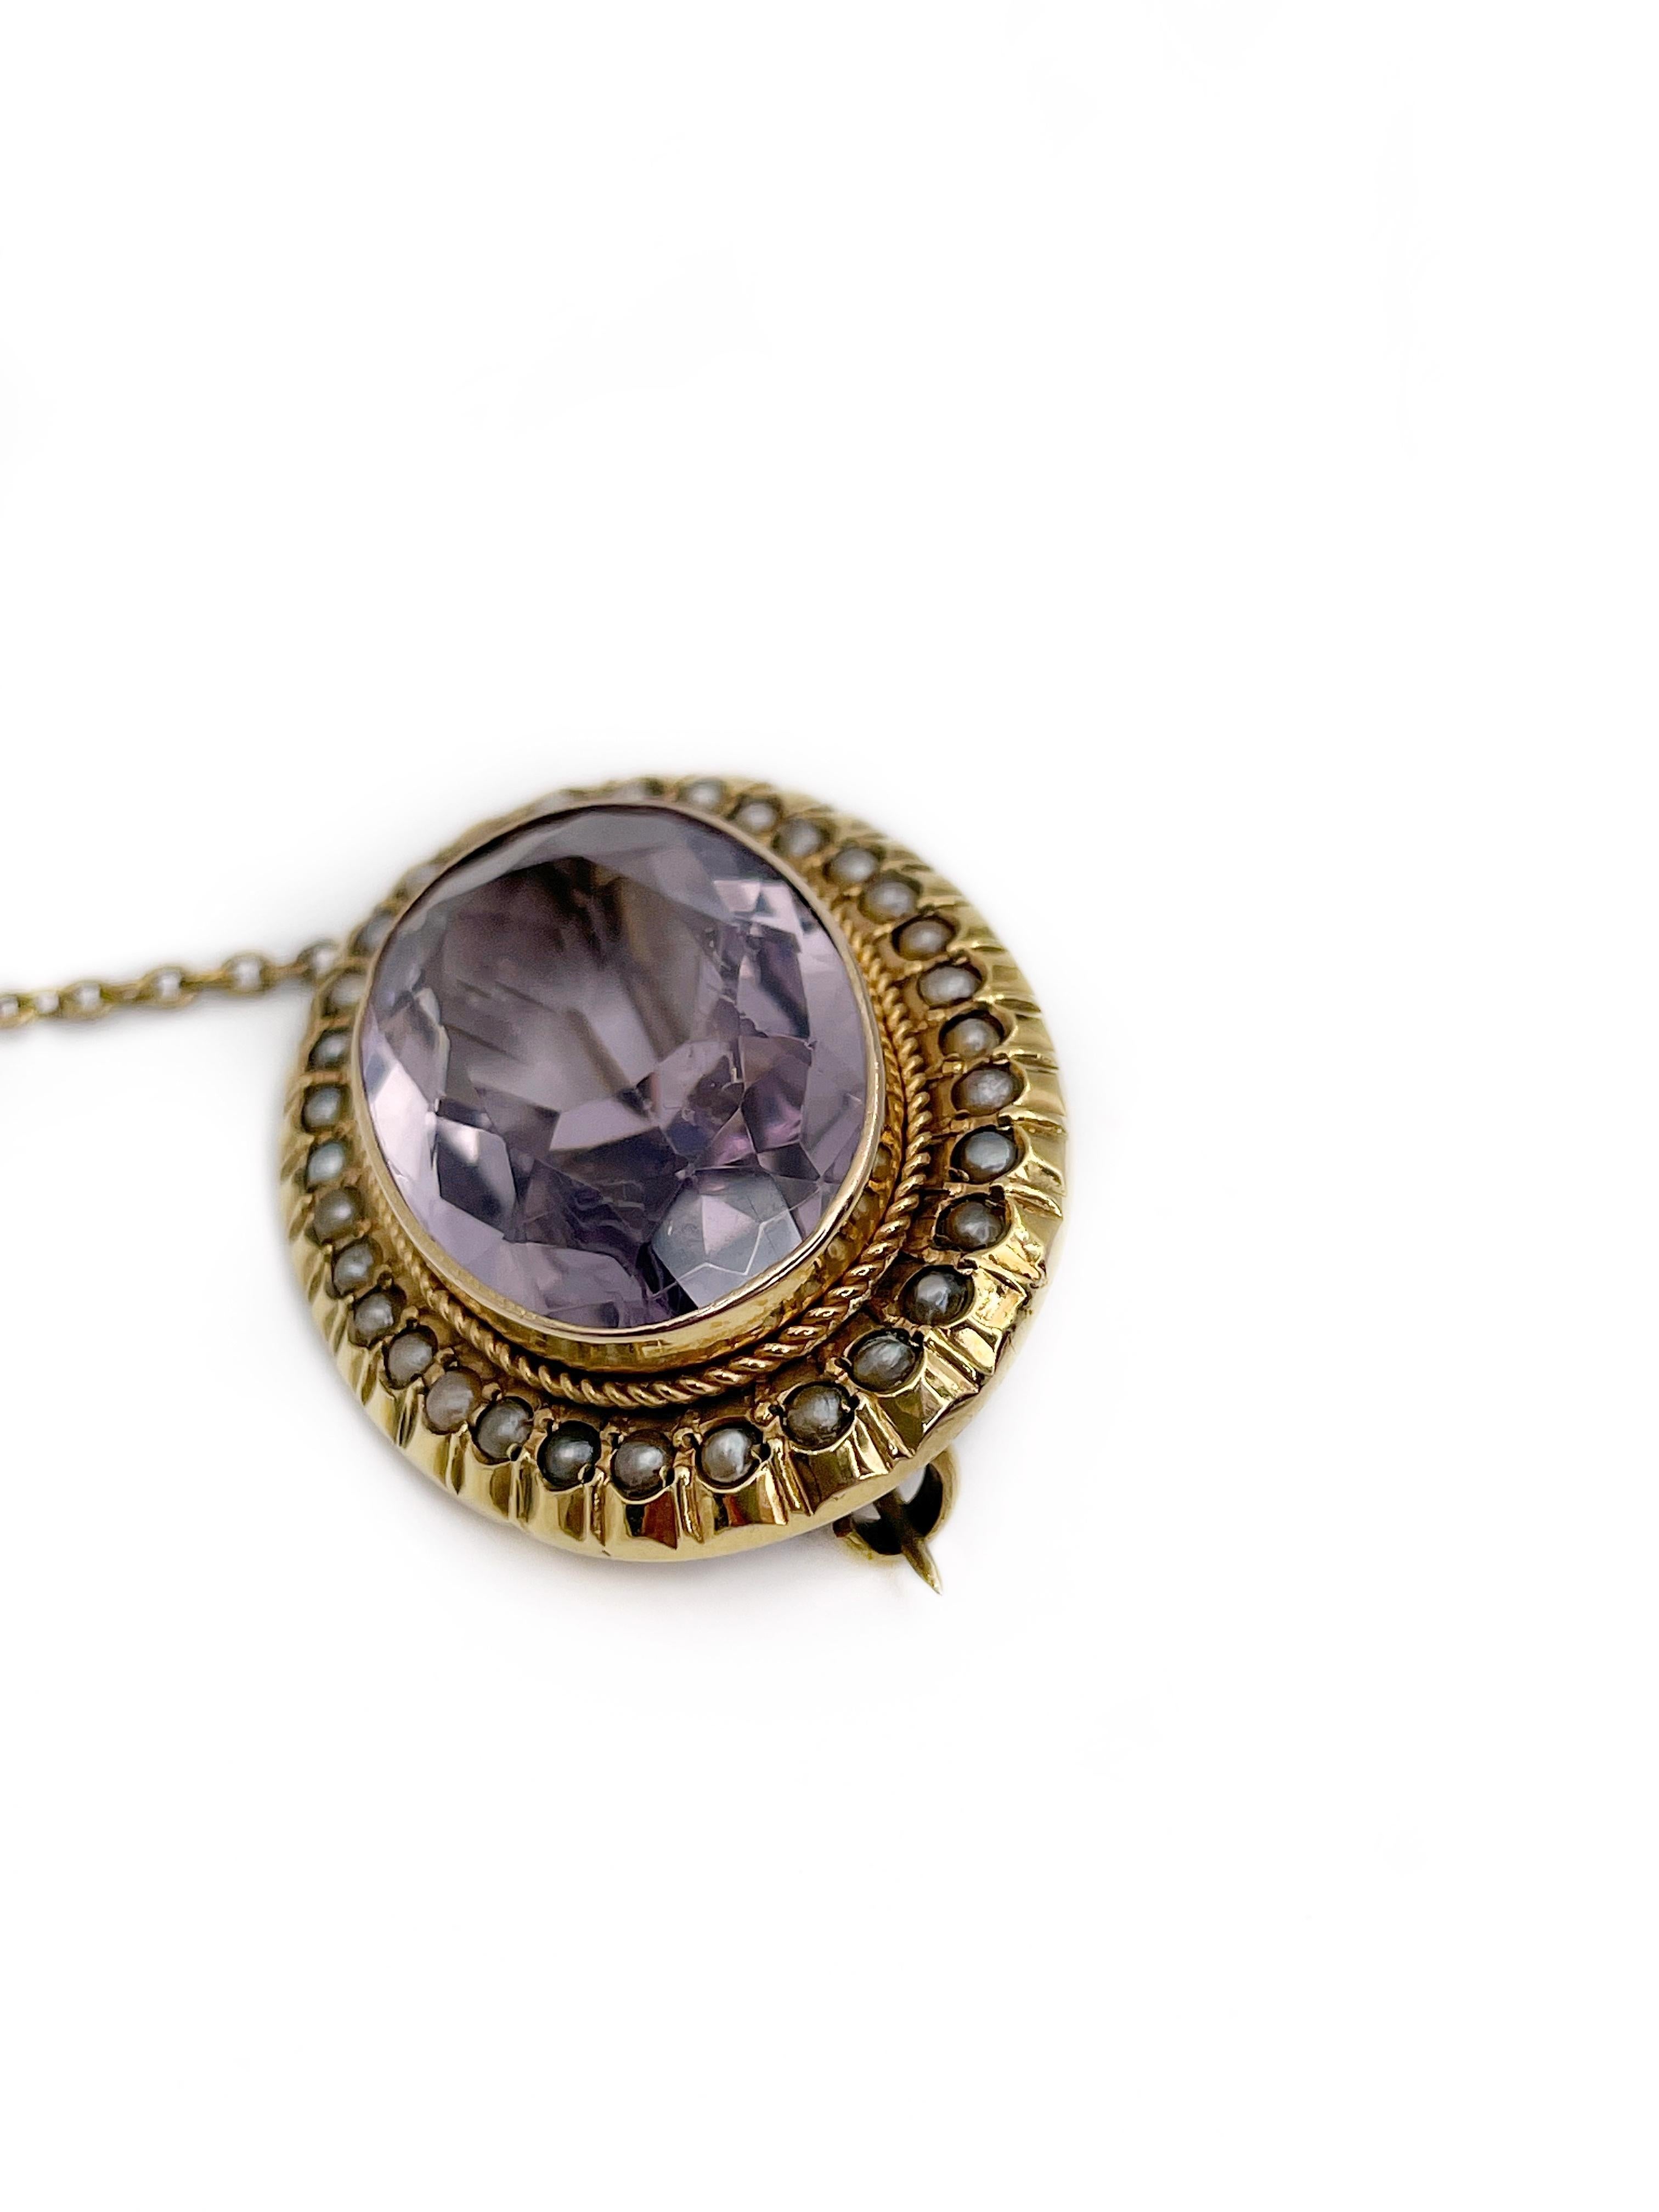 It is a lovely Victorian oval pin brooch crafted in 9K yellow gold. It features oval light purple amethyst, which is surrounded by 32 small seed pearls. 

The piece has a safety chain (6.5cm). 

Weight: 5.91g
Size: 3.2x2.4cm

———

If you have any